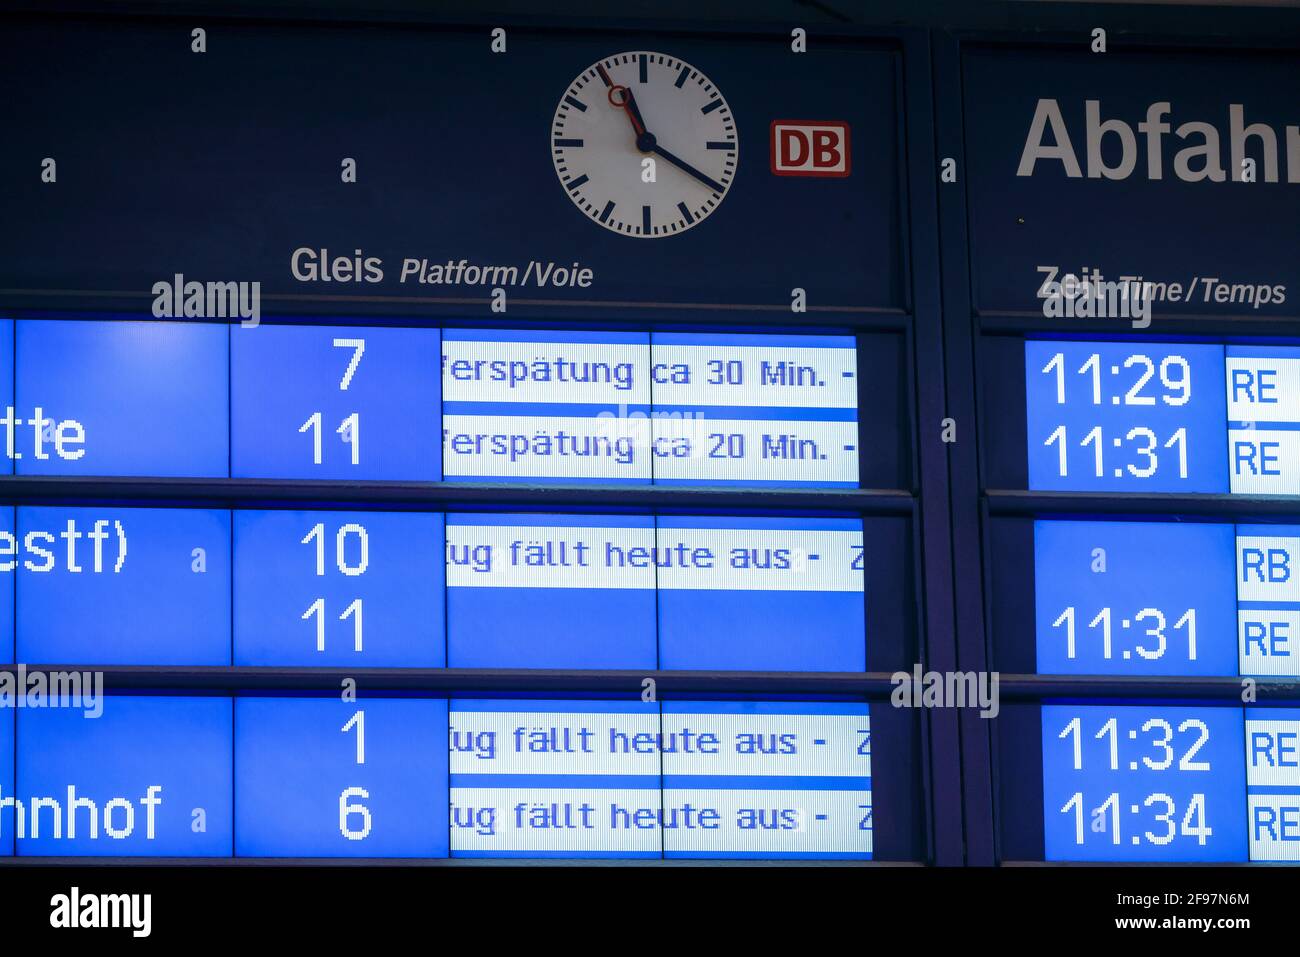 Essen, North Rhine-Westphalia, Germany - onset of winter in the Ruhr area, Essen train station, many trains are delayed or canceled due to ice and snow. Stock Photo